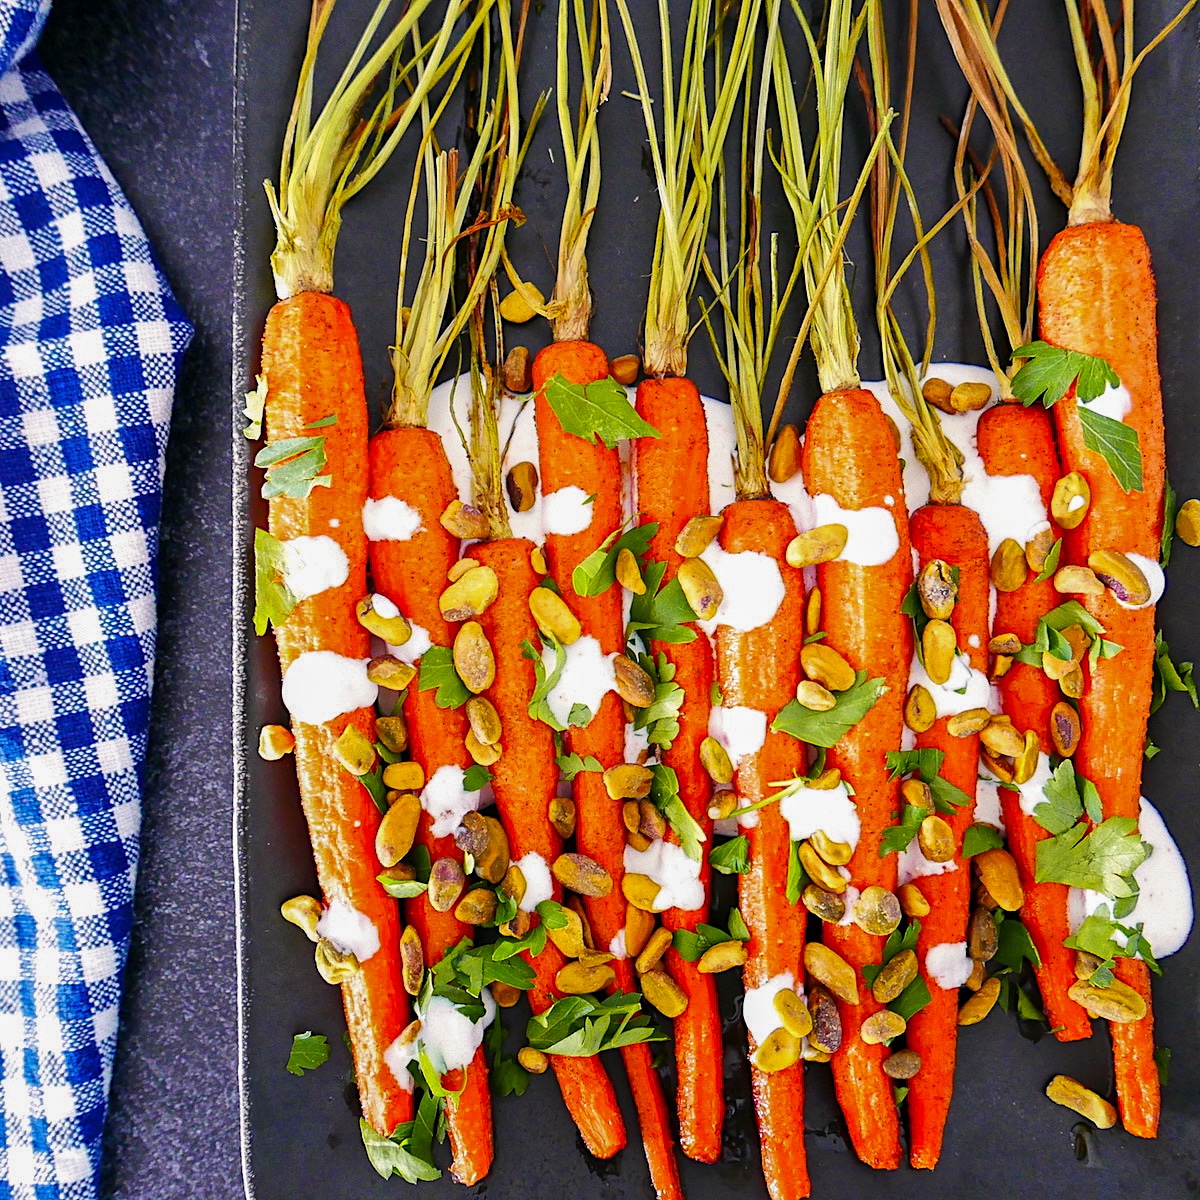 cumin roasted carrots with yogurt sauce on a platter with gingham napkin next to it.